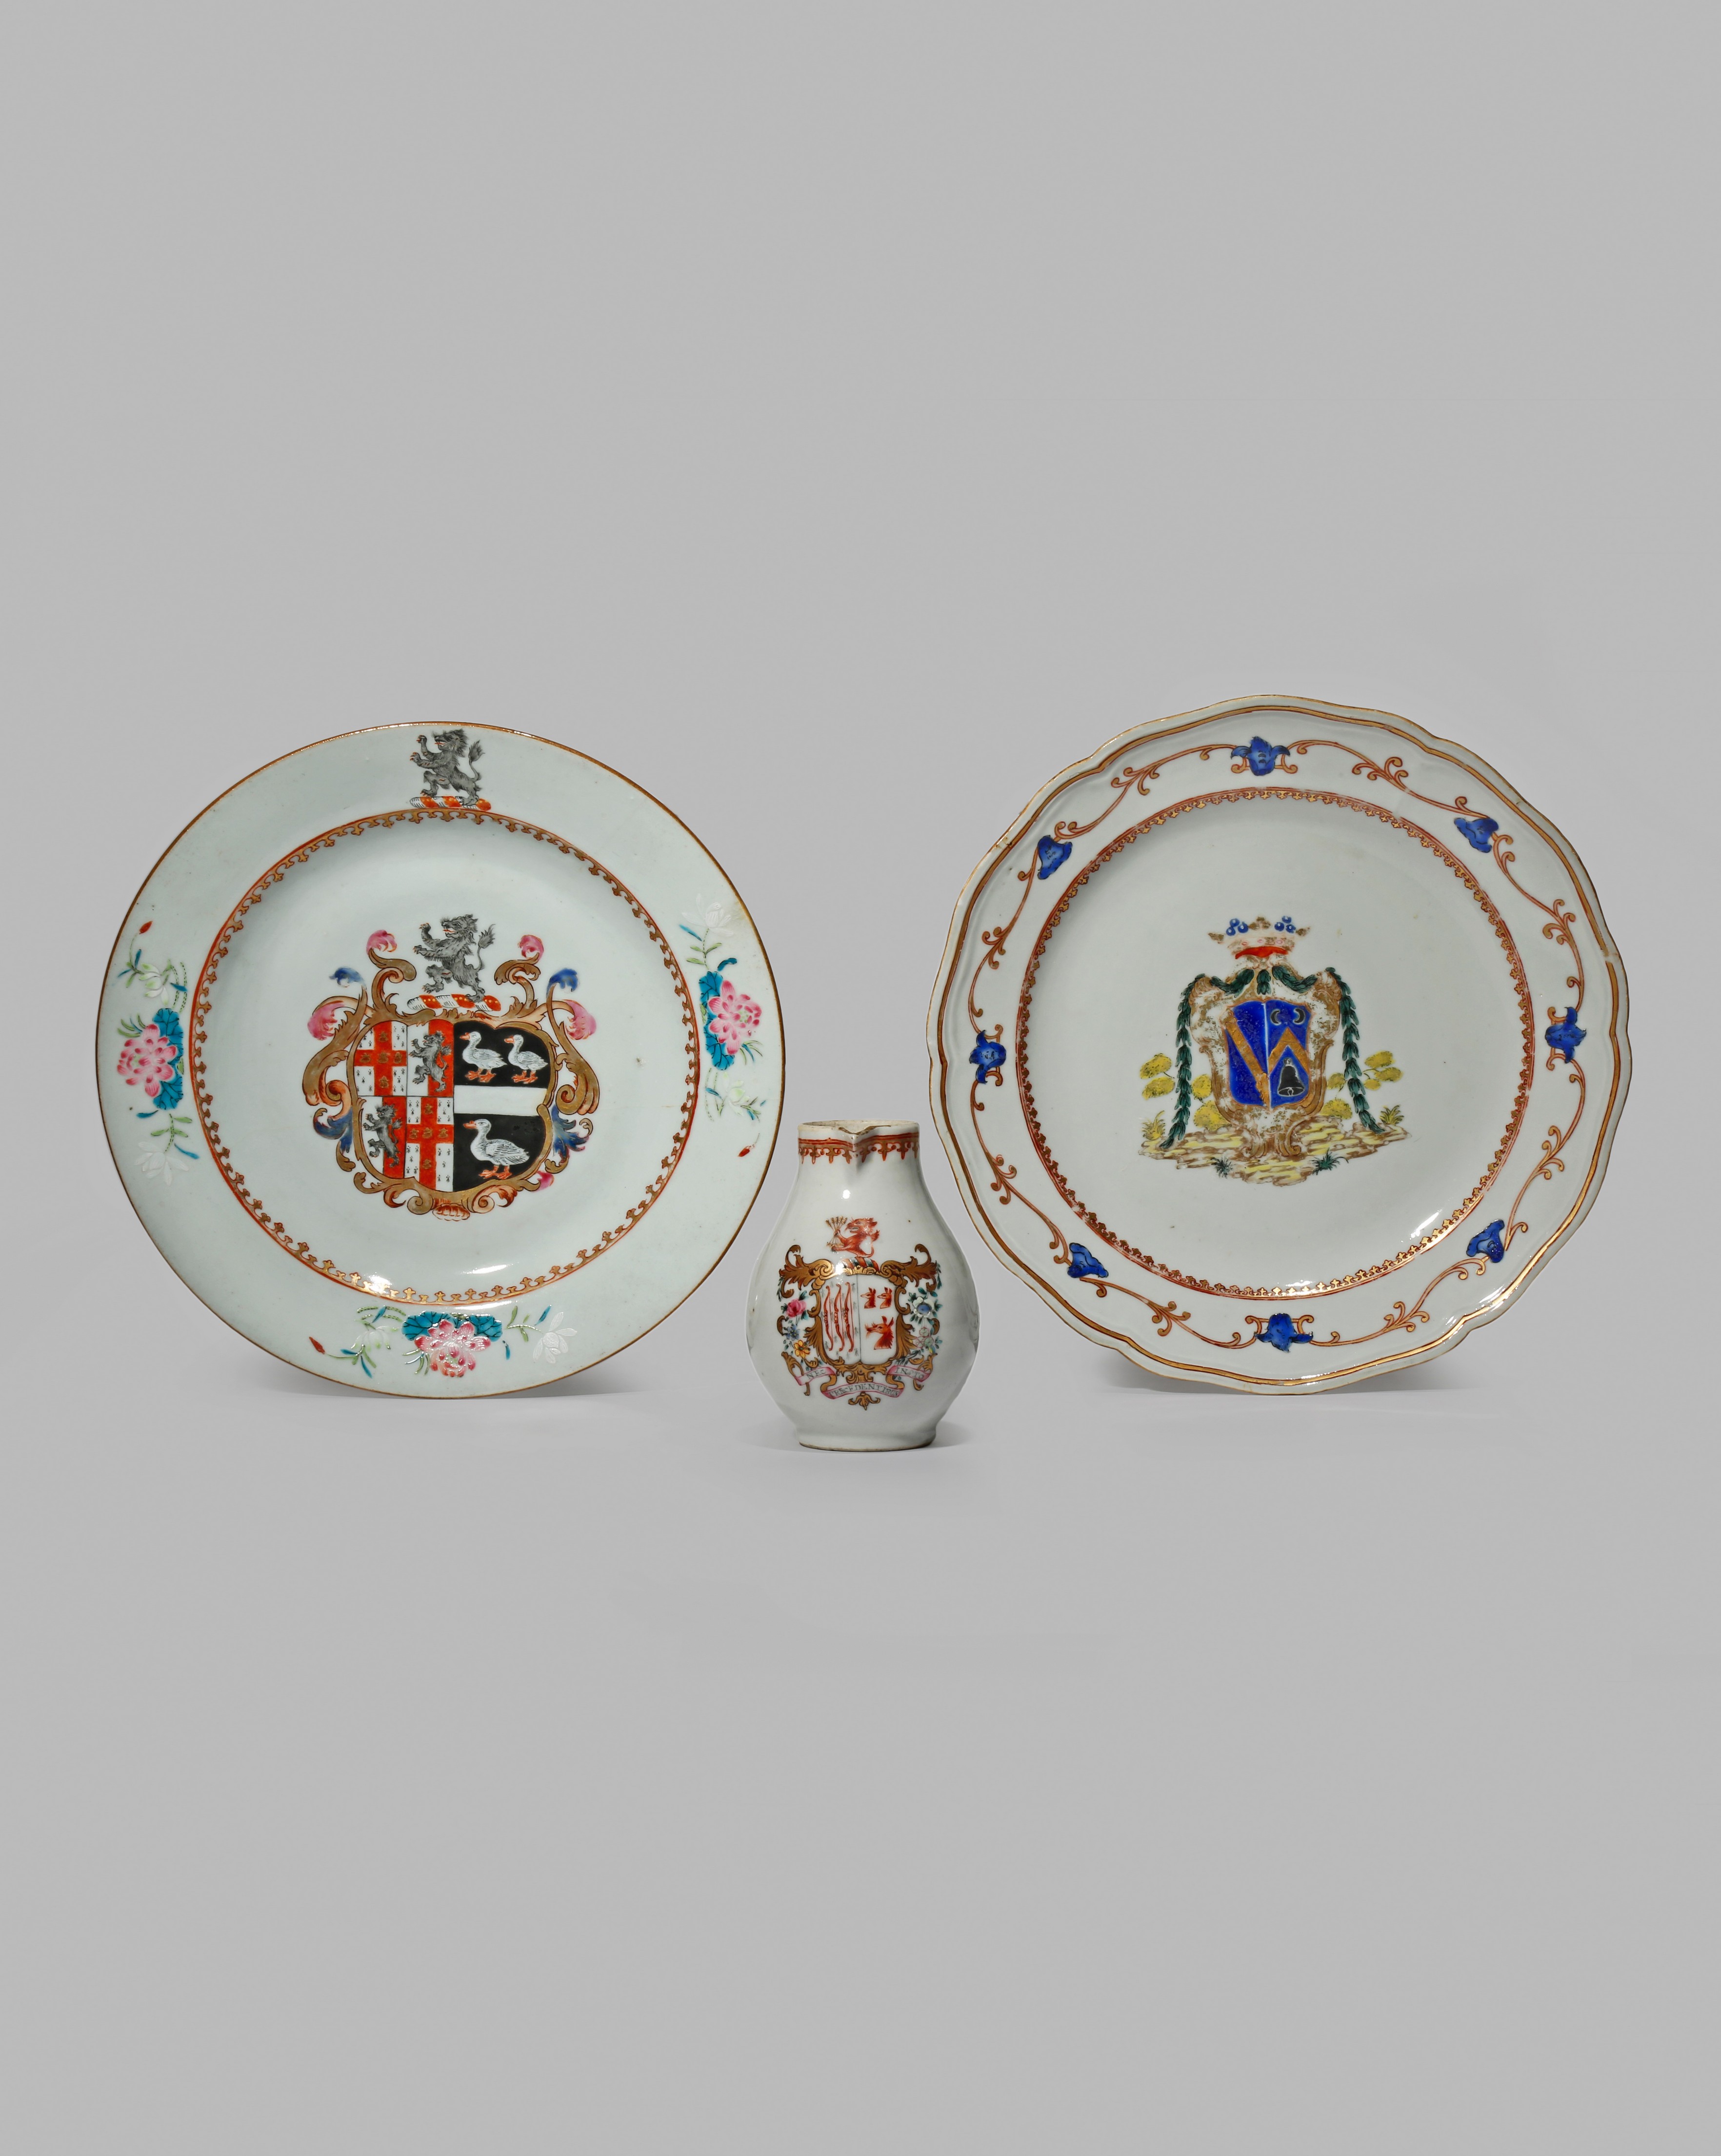 THREE CHINESE ARMORIAL ITEMS, 18TH CENTURY Comprising a jug, painted with the arms of Bowes impaling